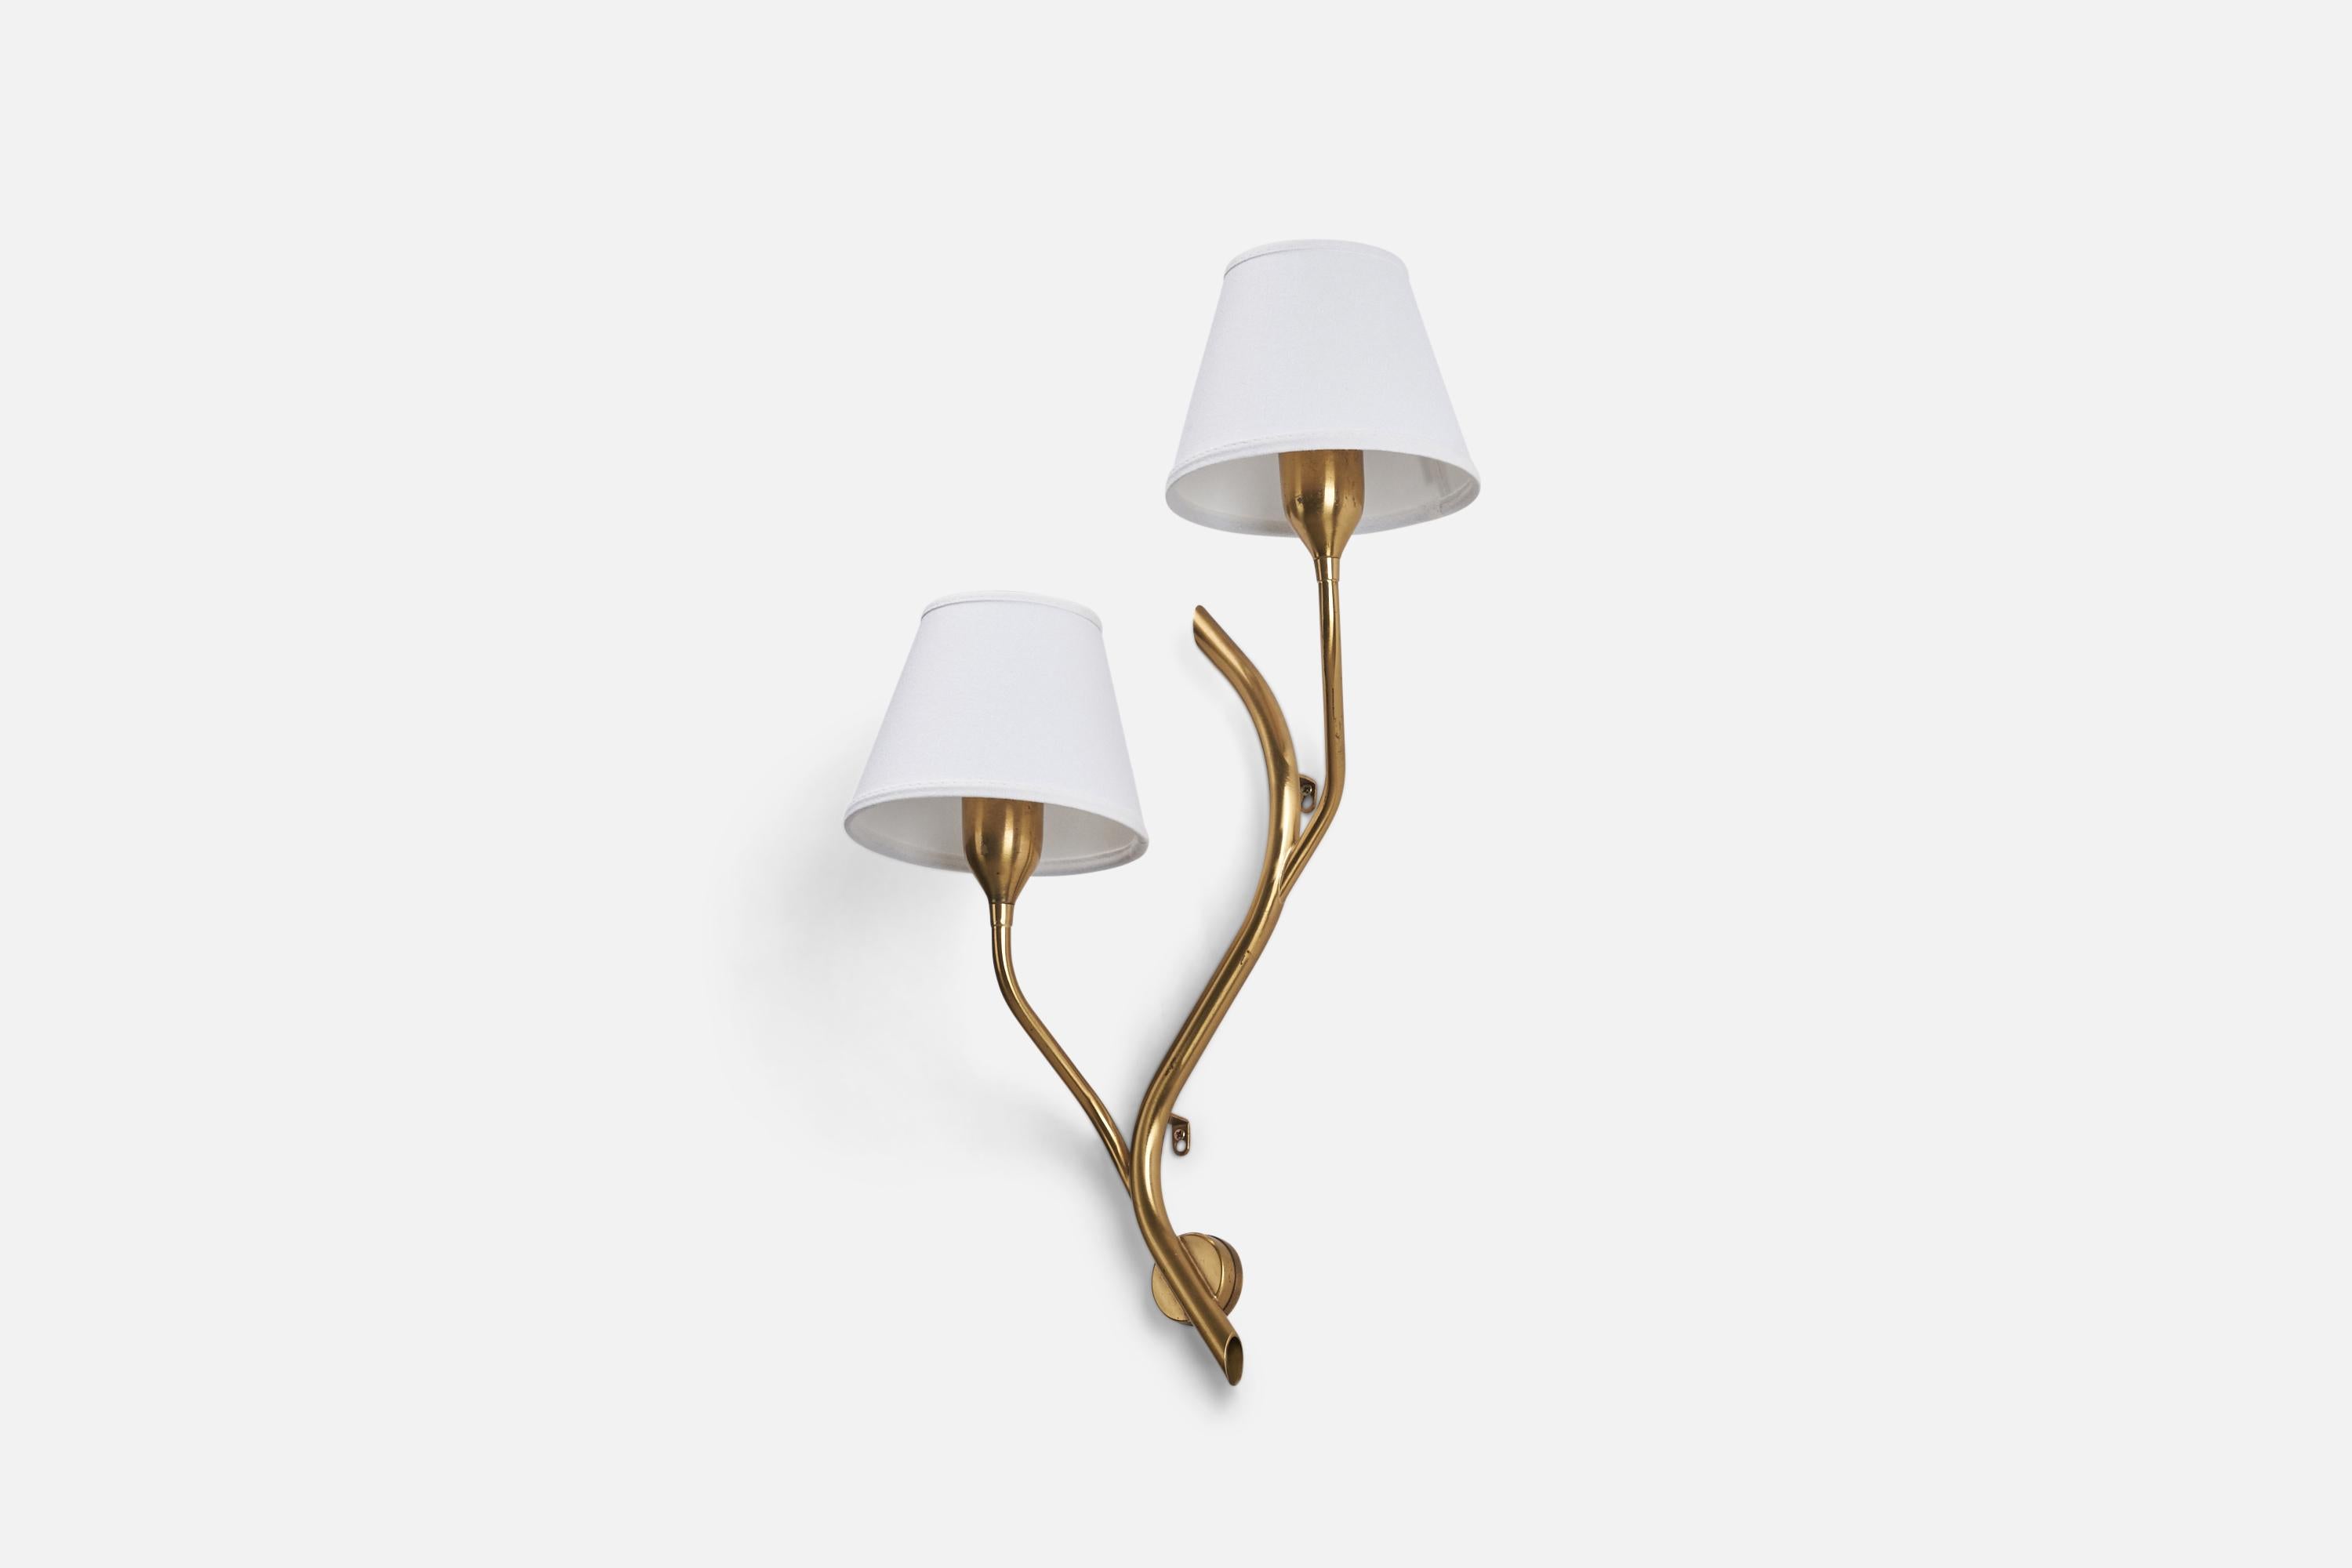 A brass and fabric designed by Astra and produced in Norway, 1950s.

Dimensions of Back Plate (inches) : 1.7 x 1.7 x 0.6 (Height x Width x Depth)

Sockets take standard E-26 medium base bulbs.

There is no maximum wattage stated on the fixture.